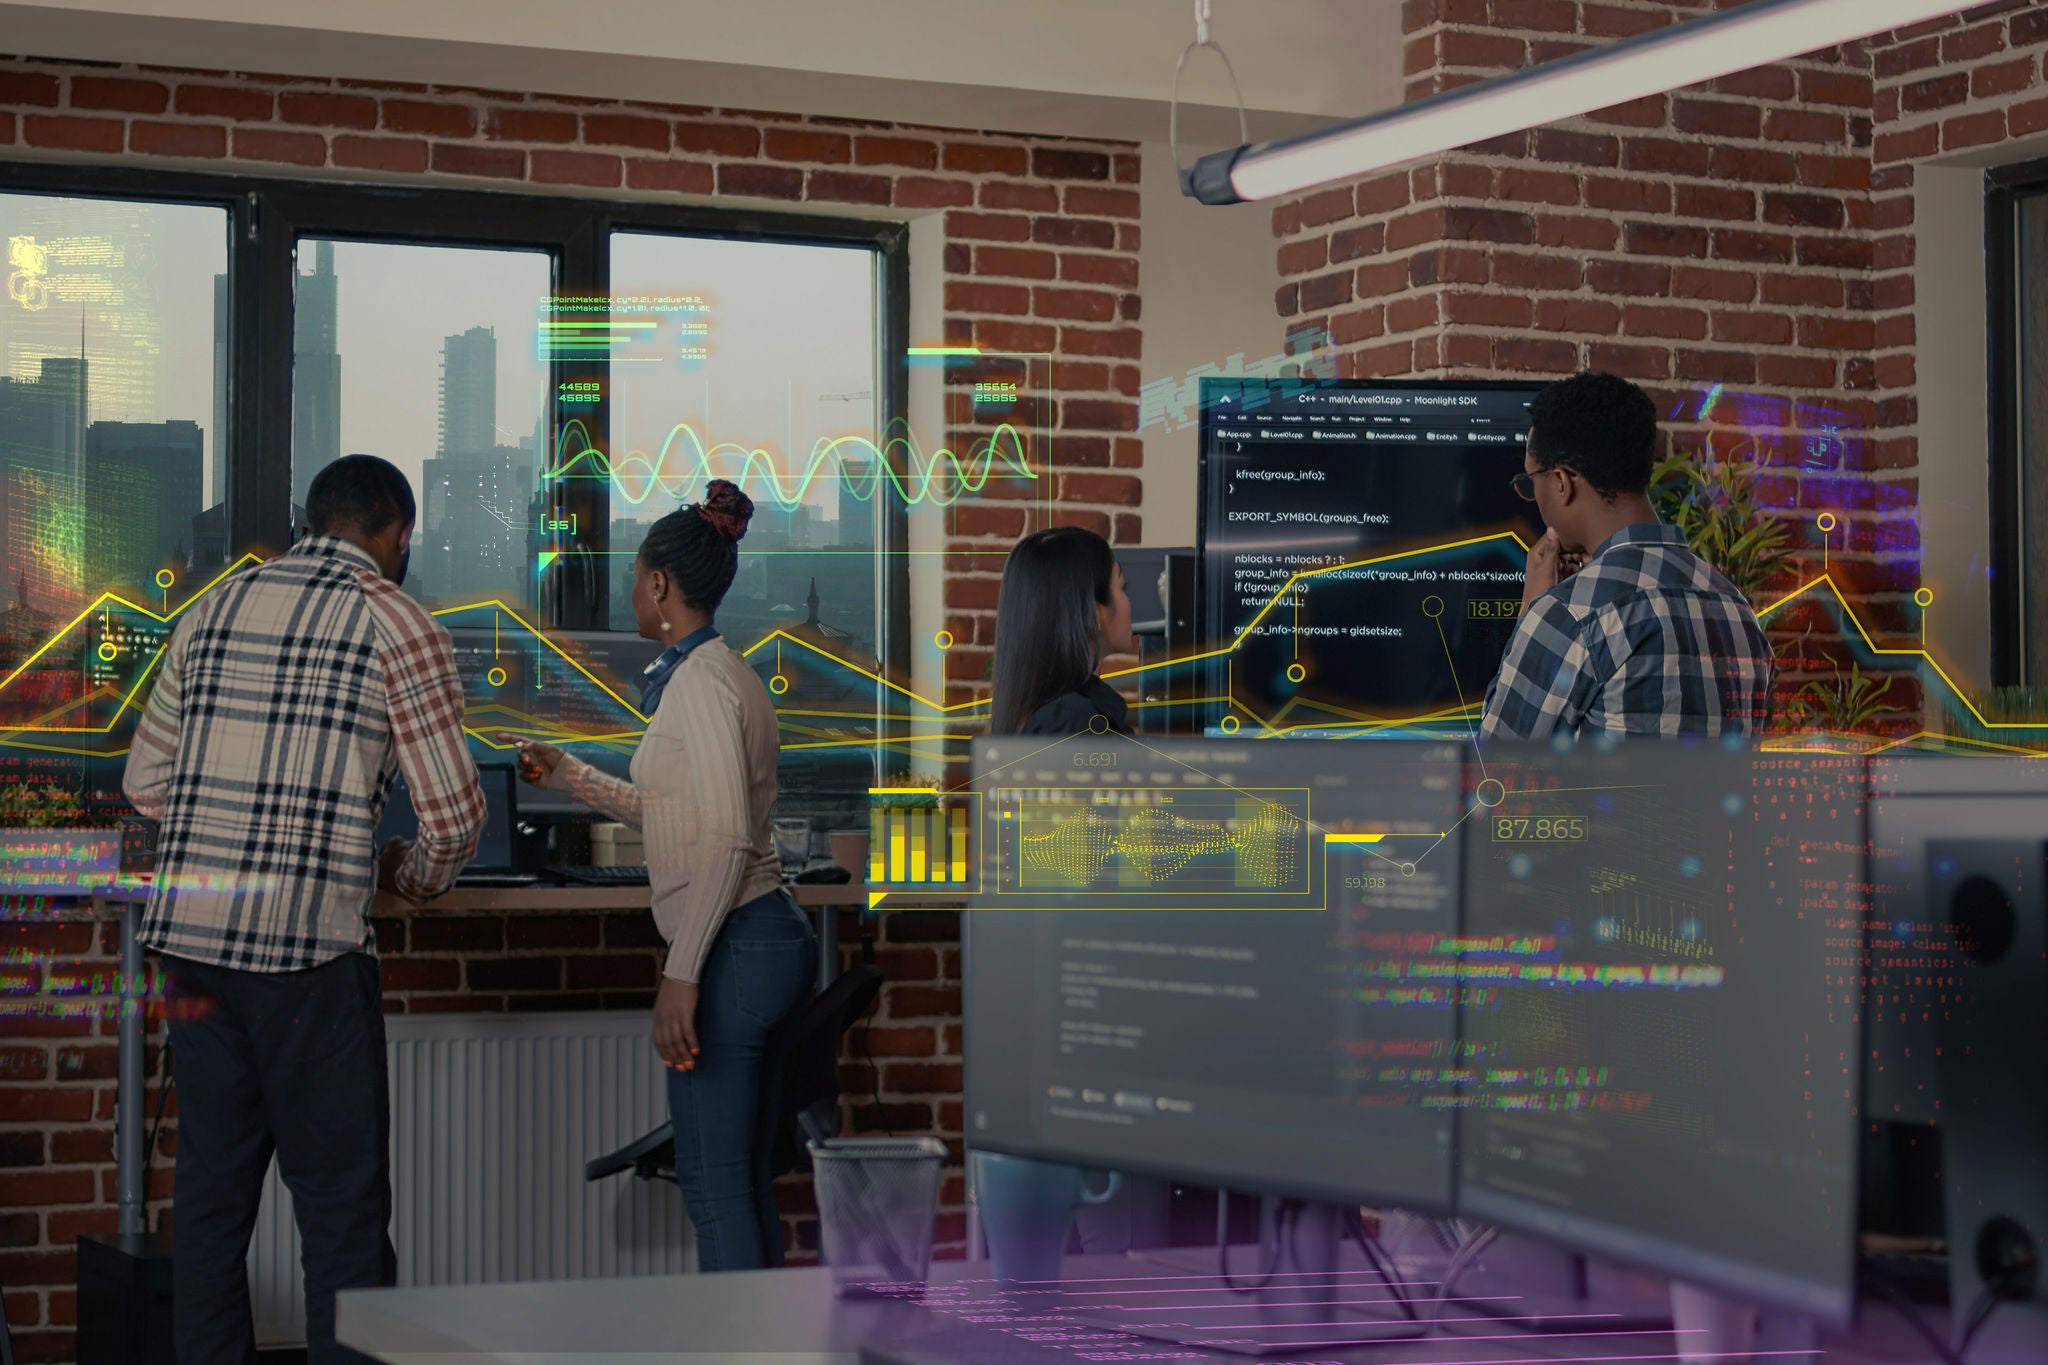 System developers analyzing code on wall screen tv looking for errors while team of coders collaborate on artificial intelligence project. Programmers working together at machine learning software.